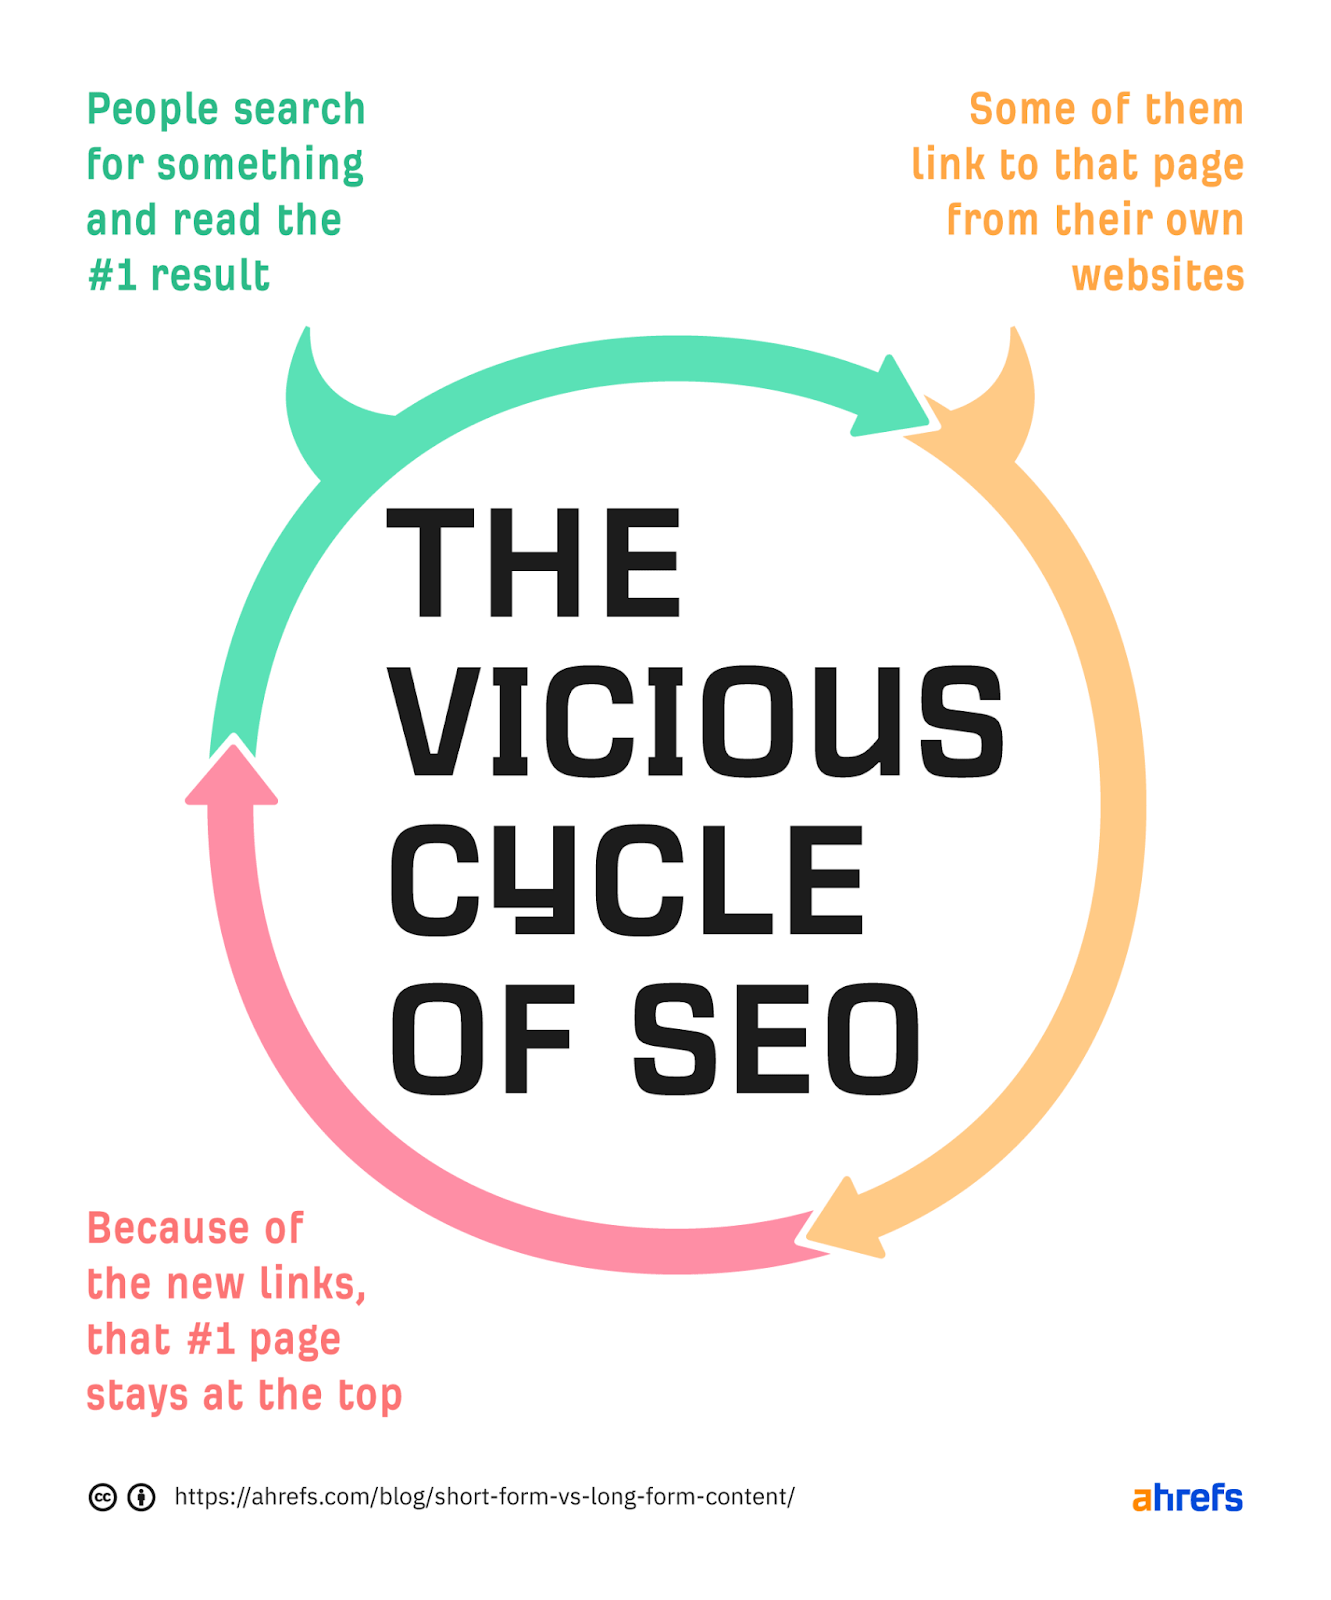 SEO cycle: People search & read #1 result, then link to that result on own site, then these new links cause #1 page to stay on top short form long form content